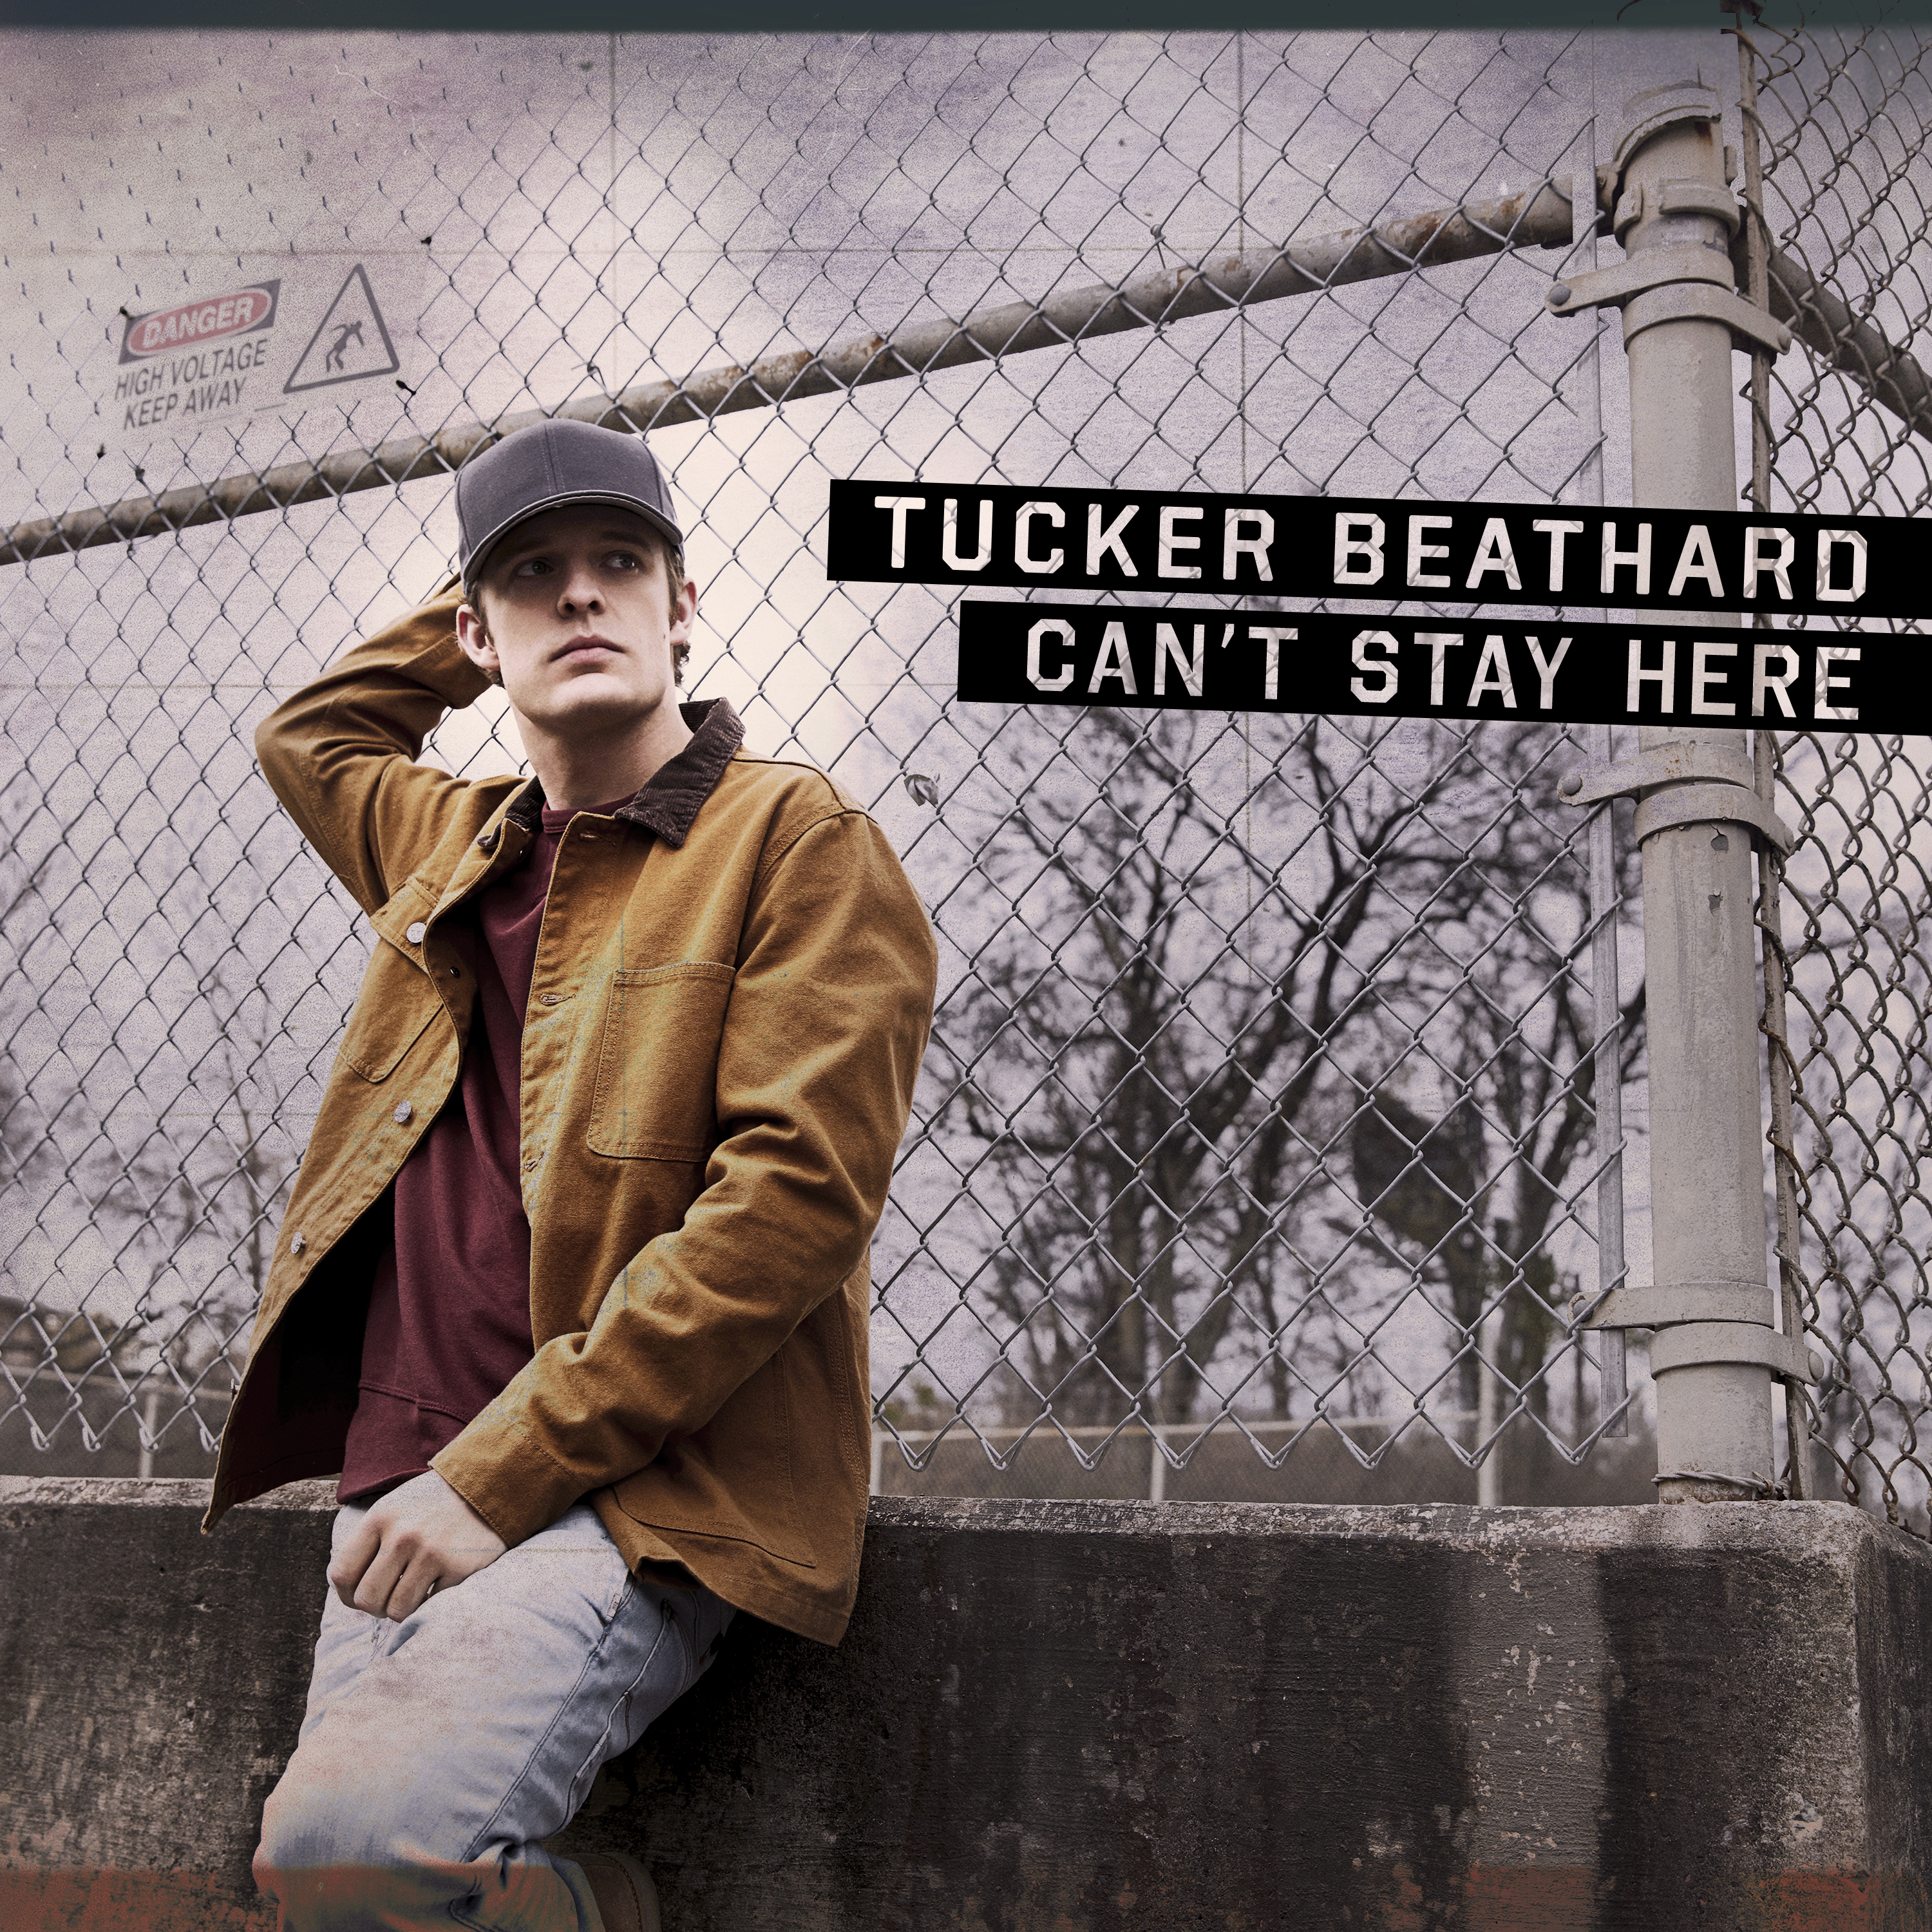 TUCKER BEATHARD'S GROOVE-DRIVEN NEW TRACK "CAN'T STAY HERE" IS AVAILABLE TODAY